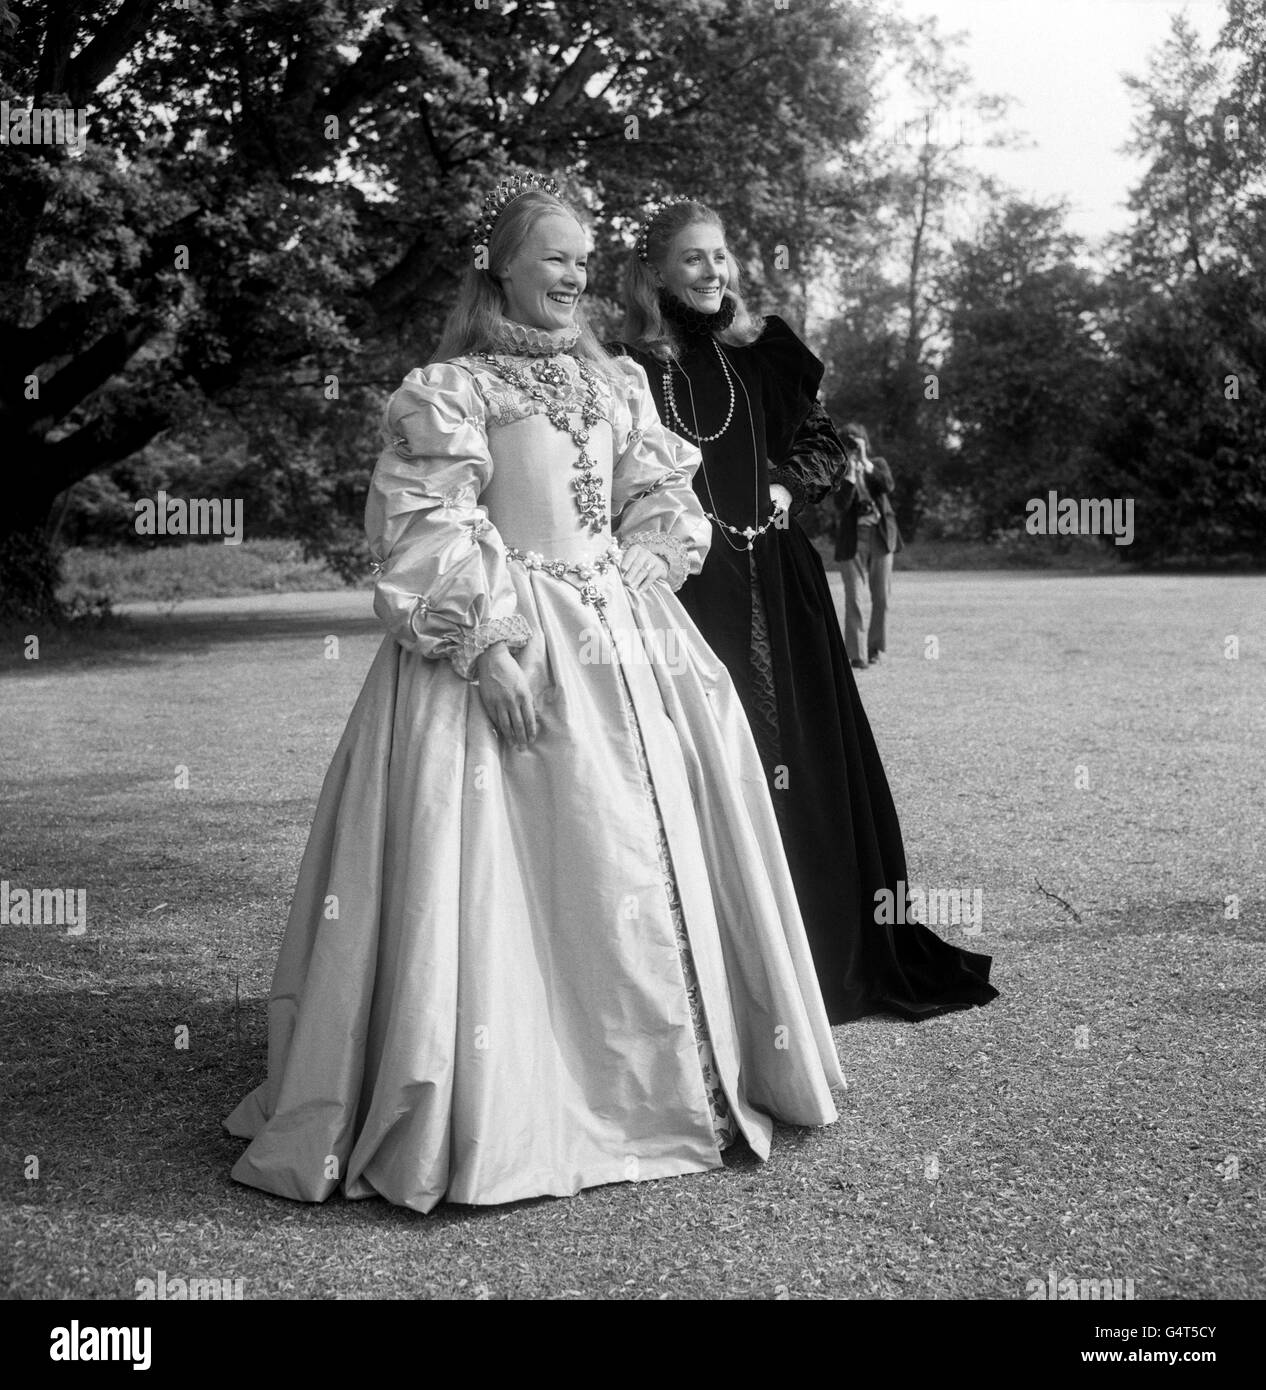 Glenda Jackson, the Academy Award winner, as Queen Elizabeth I of England, with Vanessa Redgrave, right, as Mary Queen of Scots. They are on the set of a new film, Hal Wallis's production of 'Mary, Queen of Scots' Stock Photo